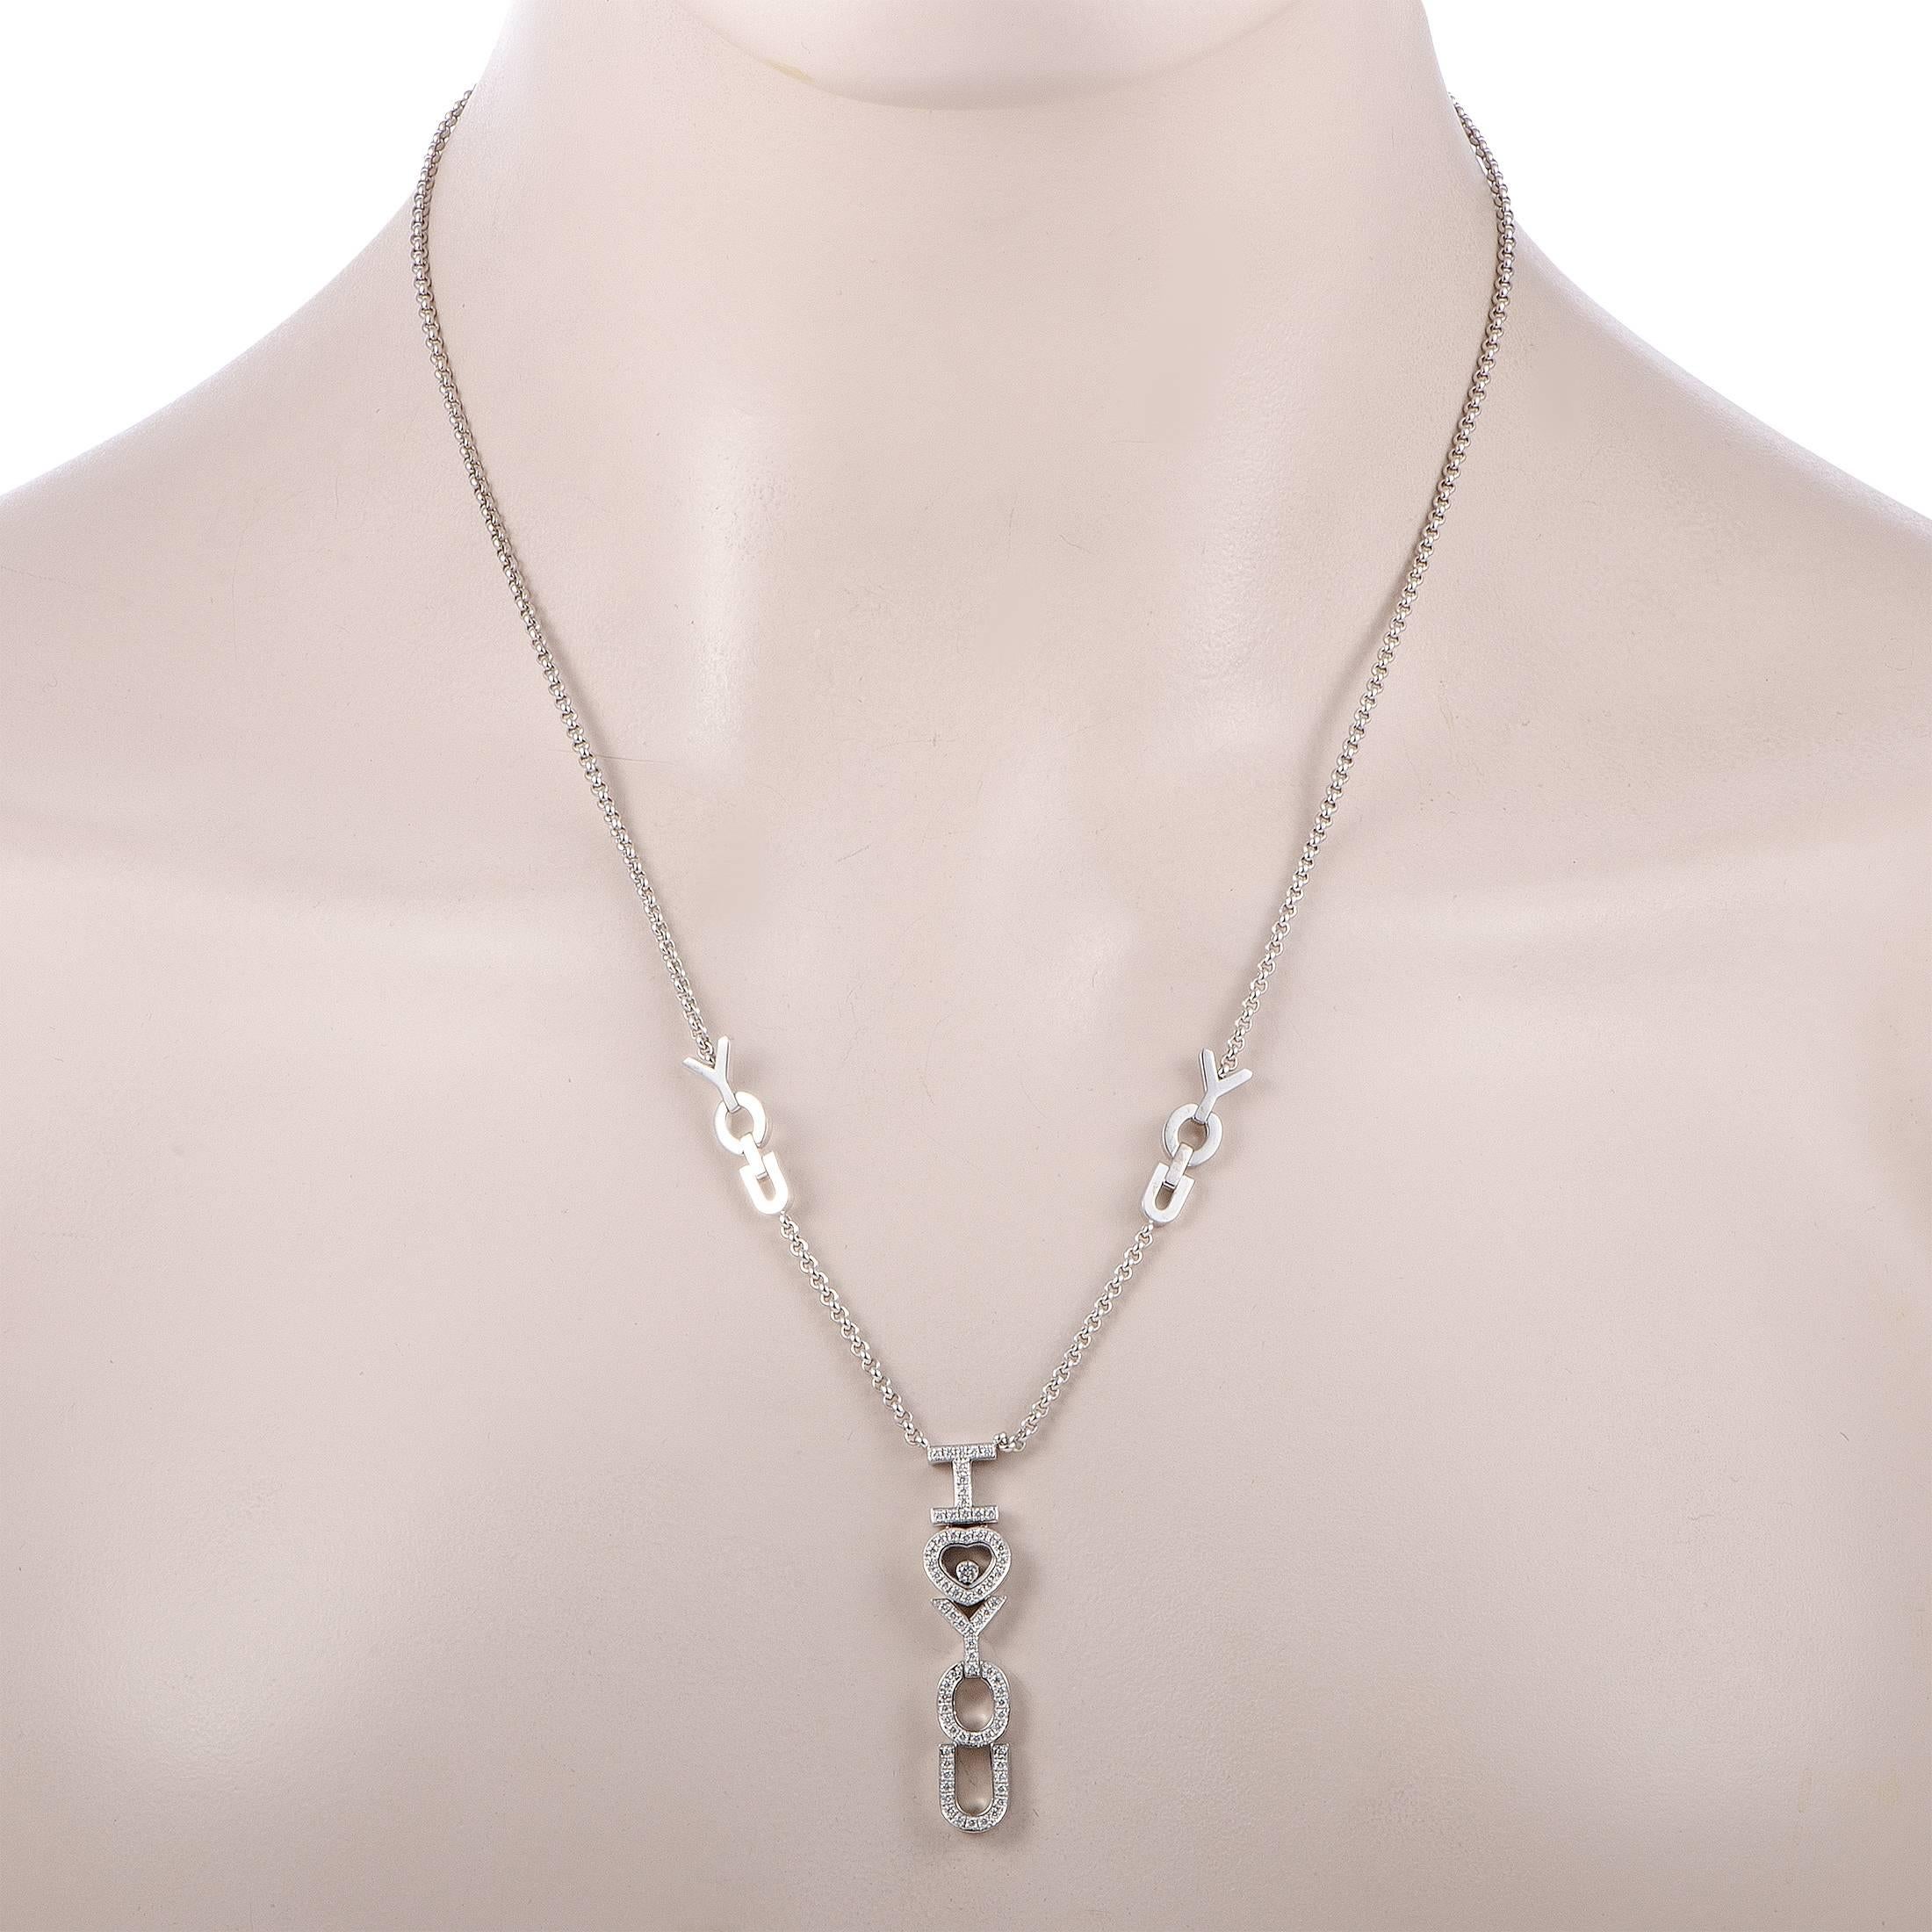 This gorgeous necklace is presented with a stylish rolo chain that features two “YOU” segments and onto which a stunningly offbeat pendant is attached. The pendant is set with diamond stones and also boasts a single floating diamond. The necklace is